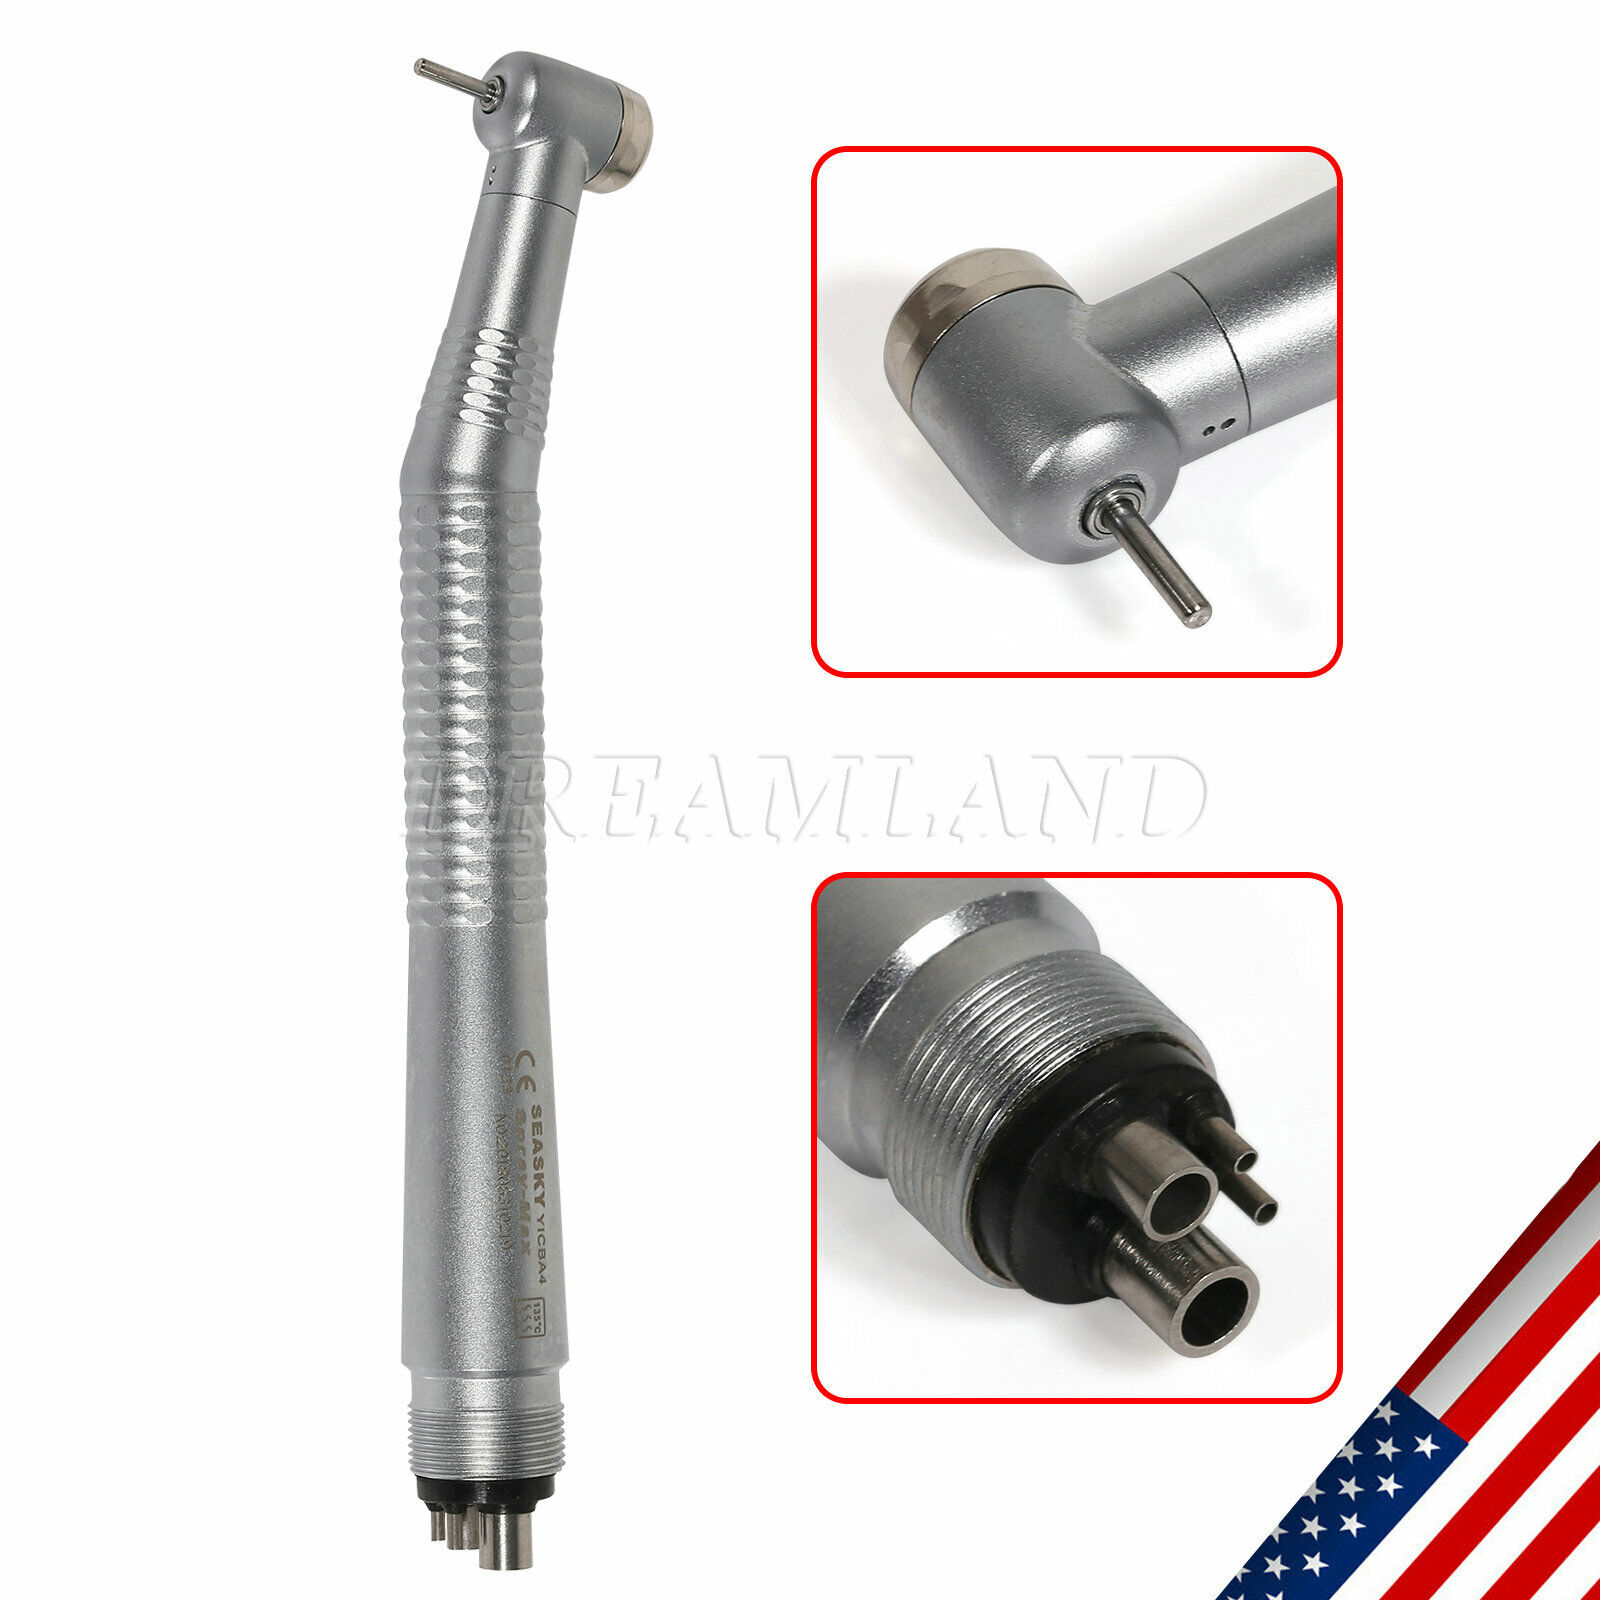 NSK Style Dental (LED E-generator) High Speed Push Button Handpiece 2/4Holes USA